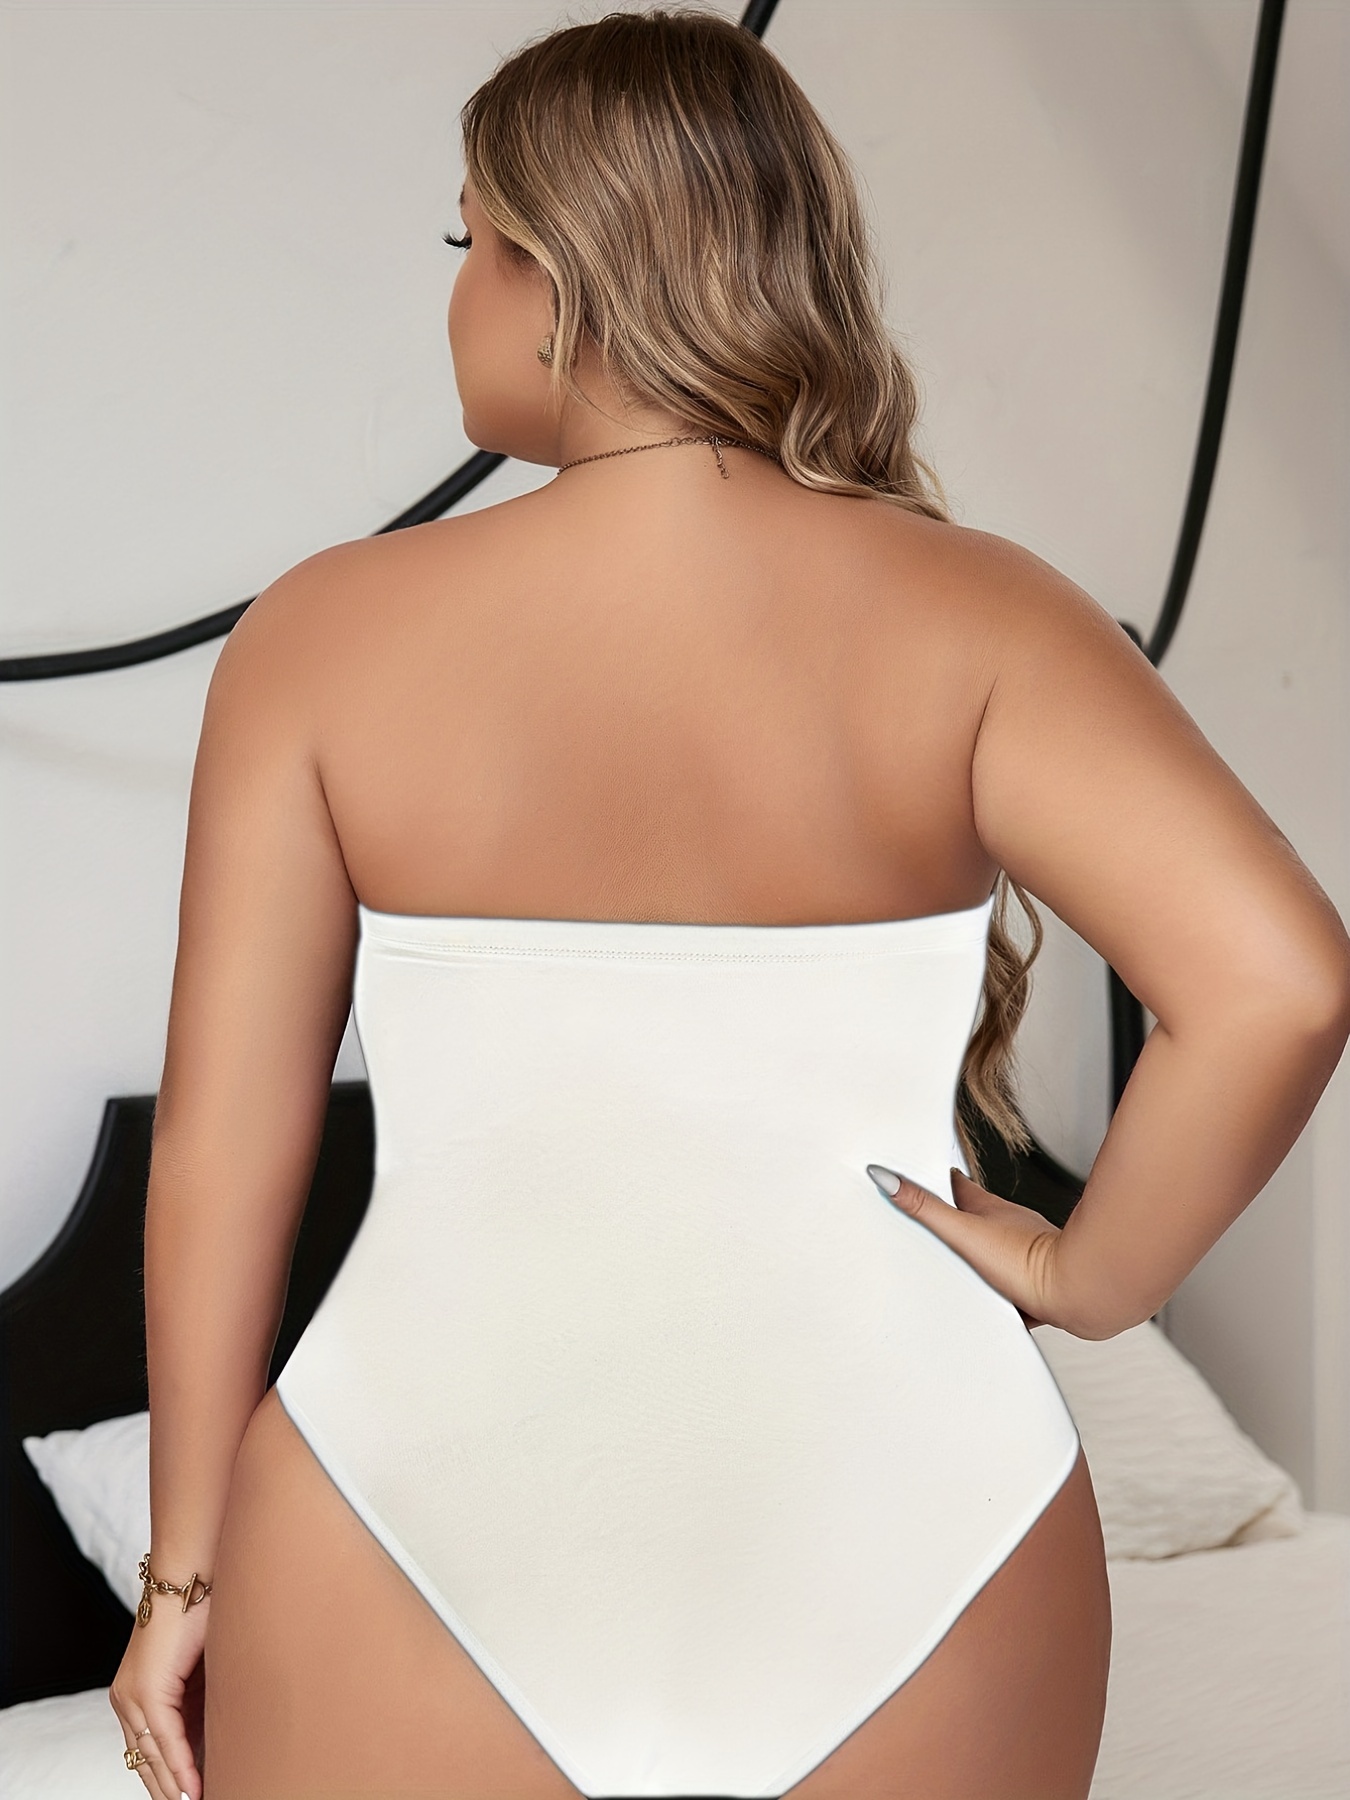 Women's Sexy Shapewear Bodysuit, Plus Size Lace Trim Open Bust Crotchless  Tummy Control Body Shaper, Check Out Today's Deals Now